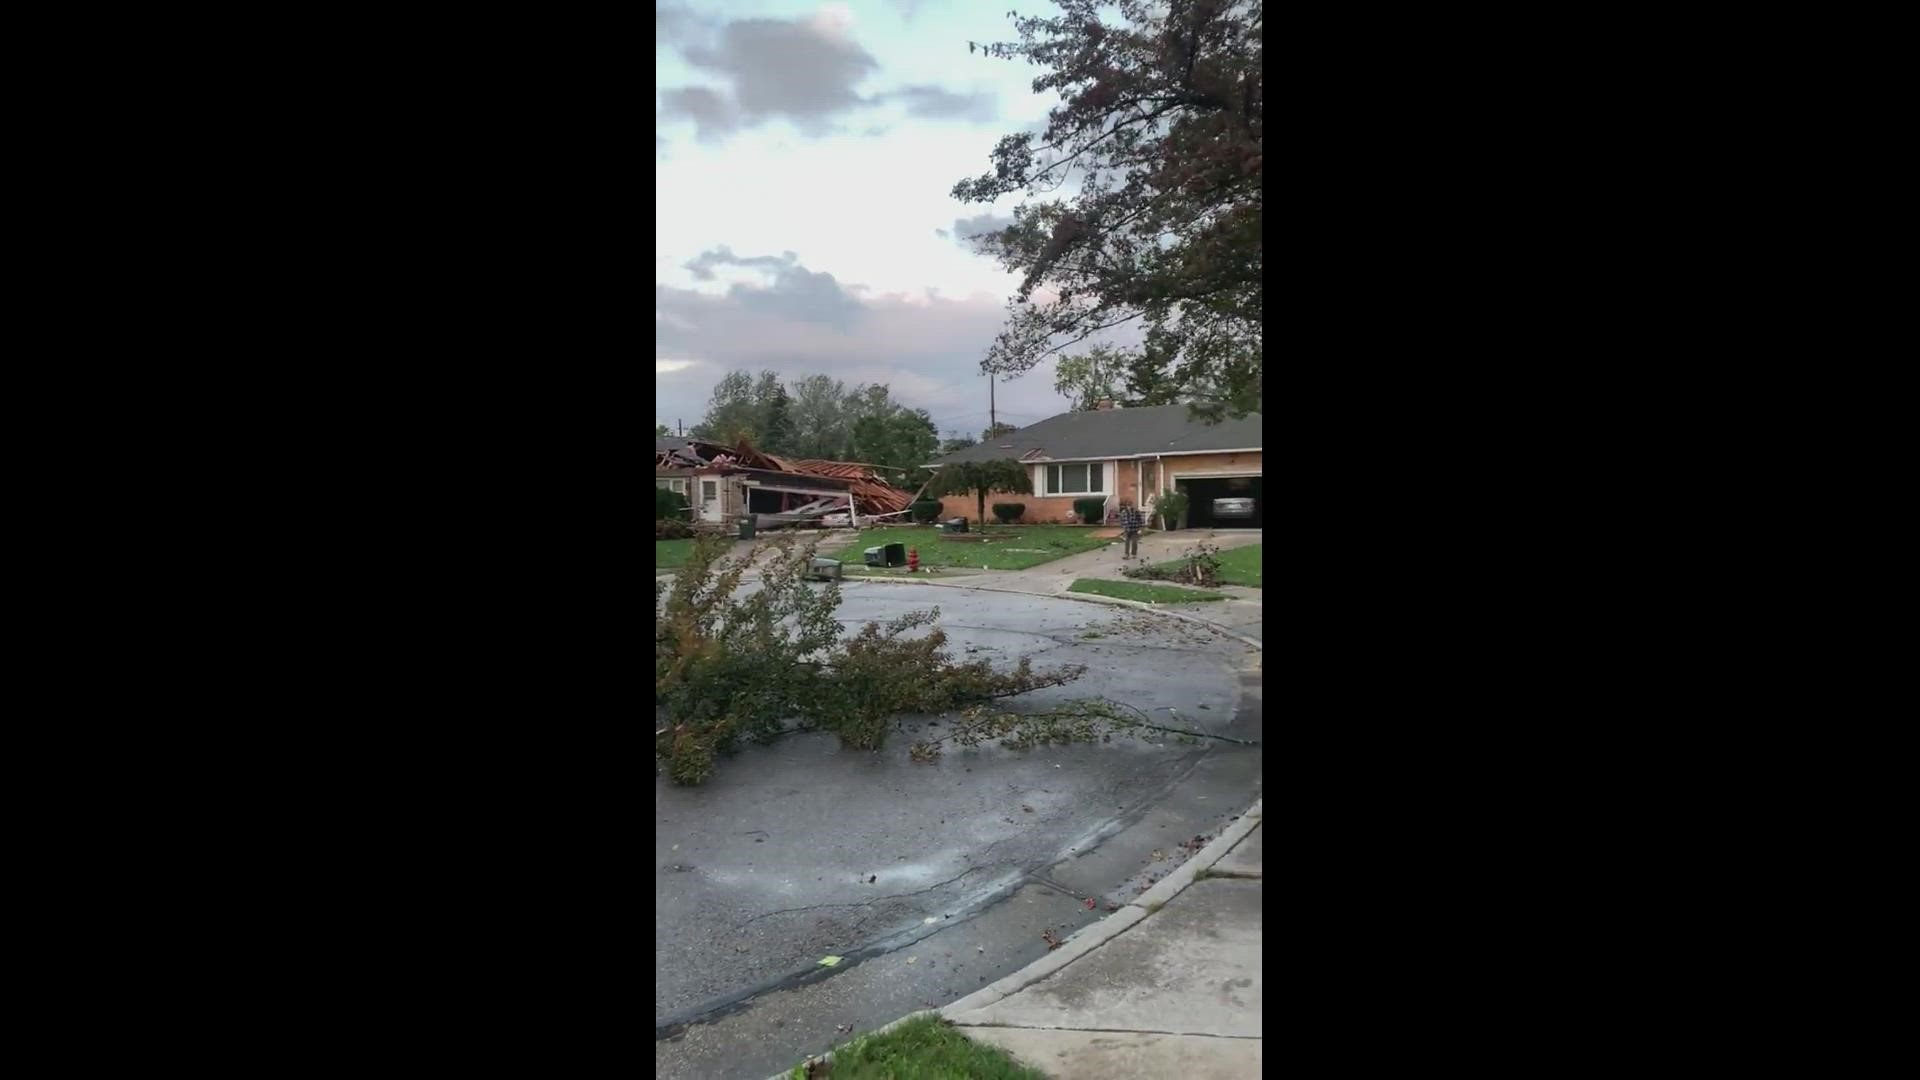 This video, sent to our 3News weather team from @wickliffe092 on Twitter, shows the aftermath in Wickliffe. At least one home has encountered severe damage.